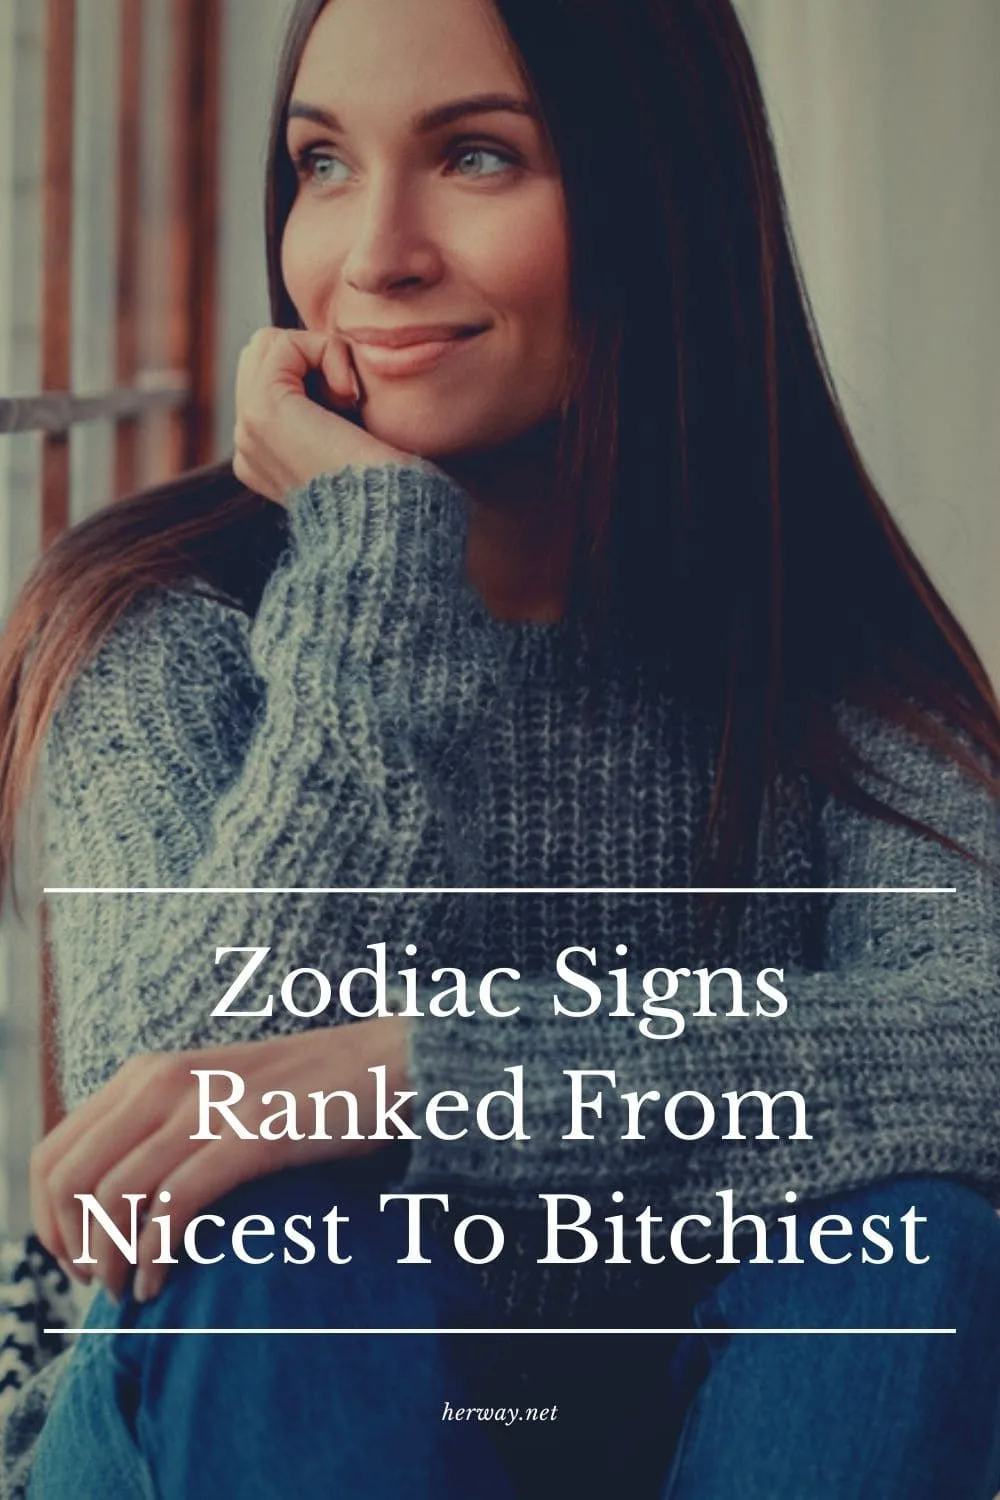 Zodiac Signs Ranked From Nicest To Bitchiest